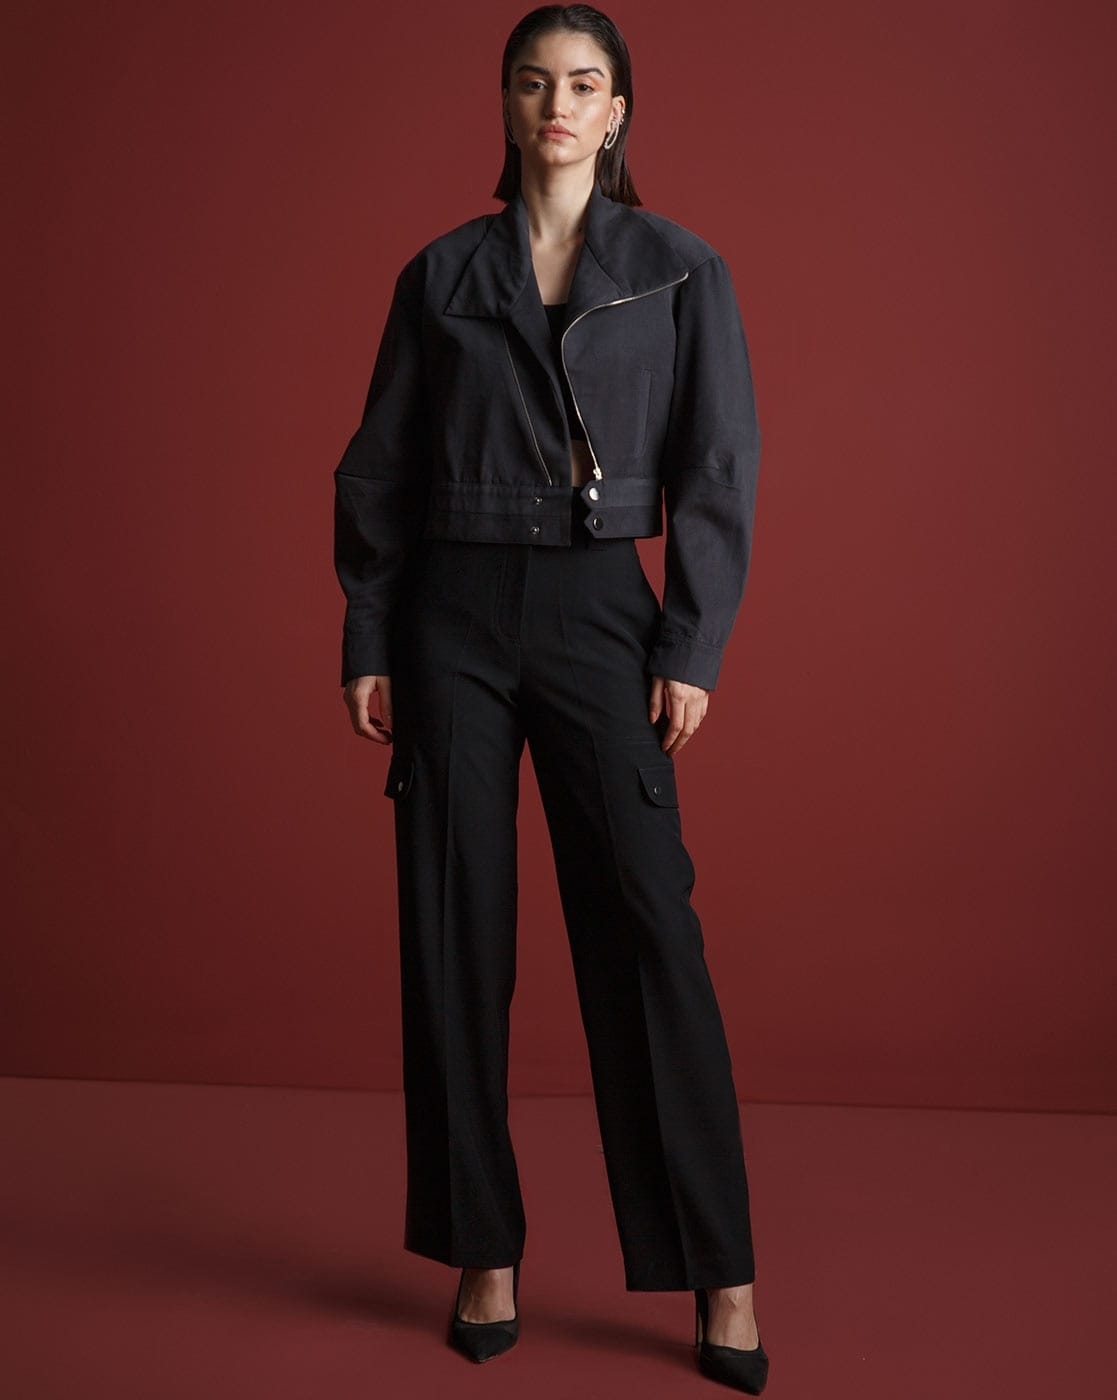 Buy The Dapper Lady Flared Pants with Two Side Pockets